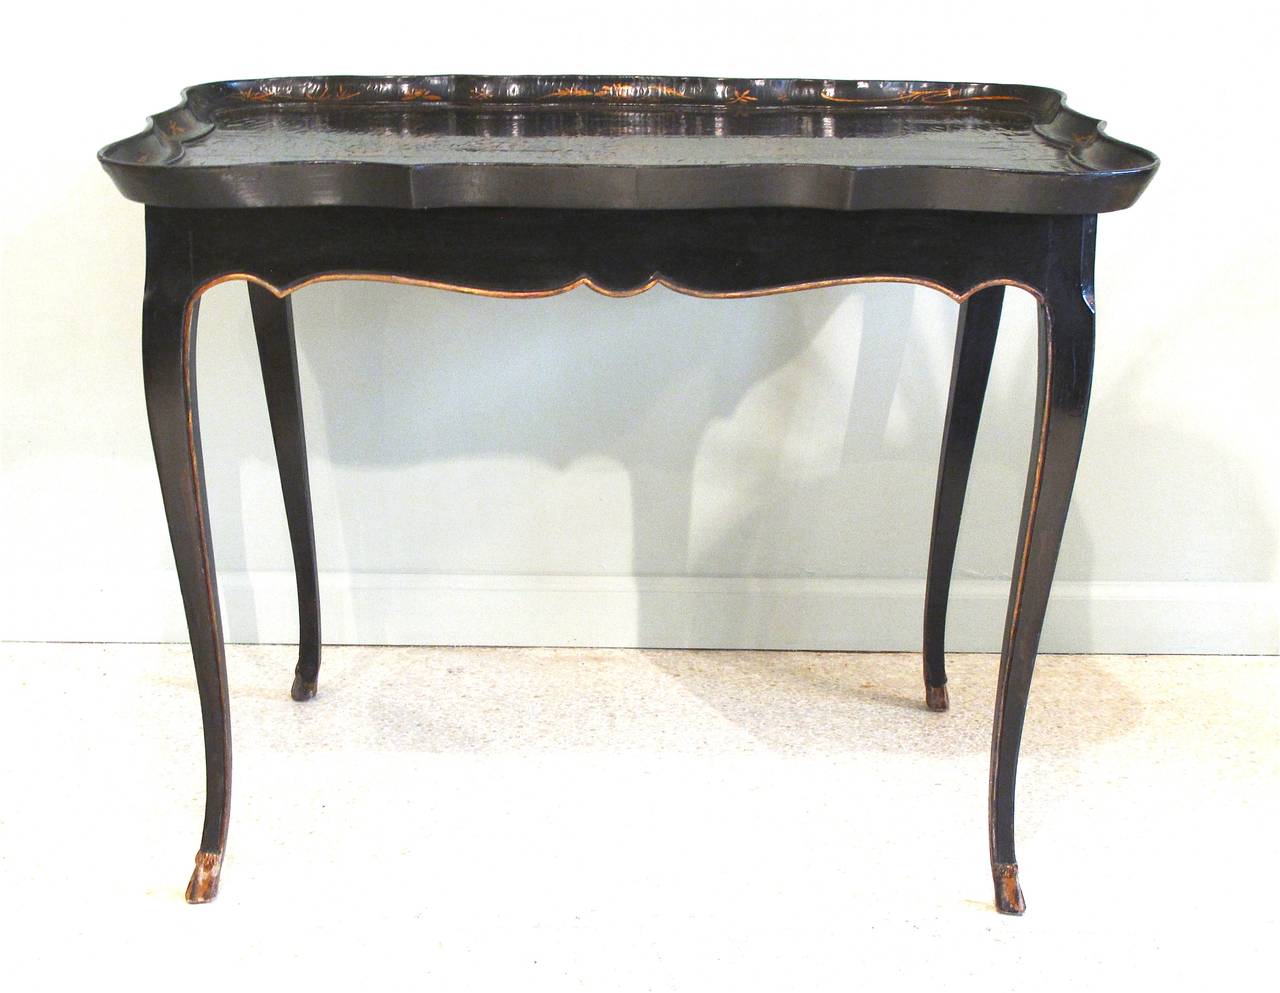 A graceful French black painted and parcel gilt occasional table on cabriole legs ending in pied de biche feet dating probably to the second quarter of the 19th century. This table was made to fit the slightly earlier, ca. 1820, Chinese lacquer tray